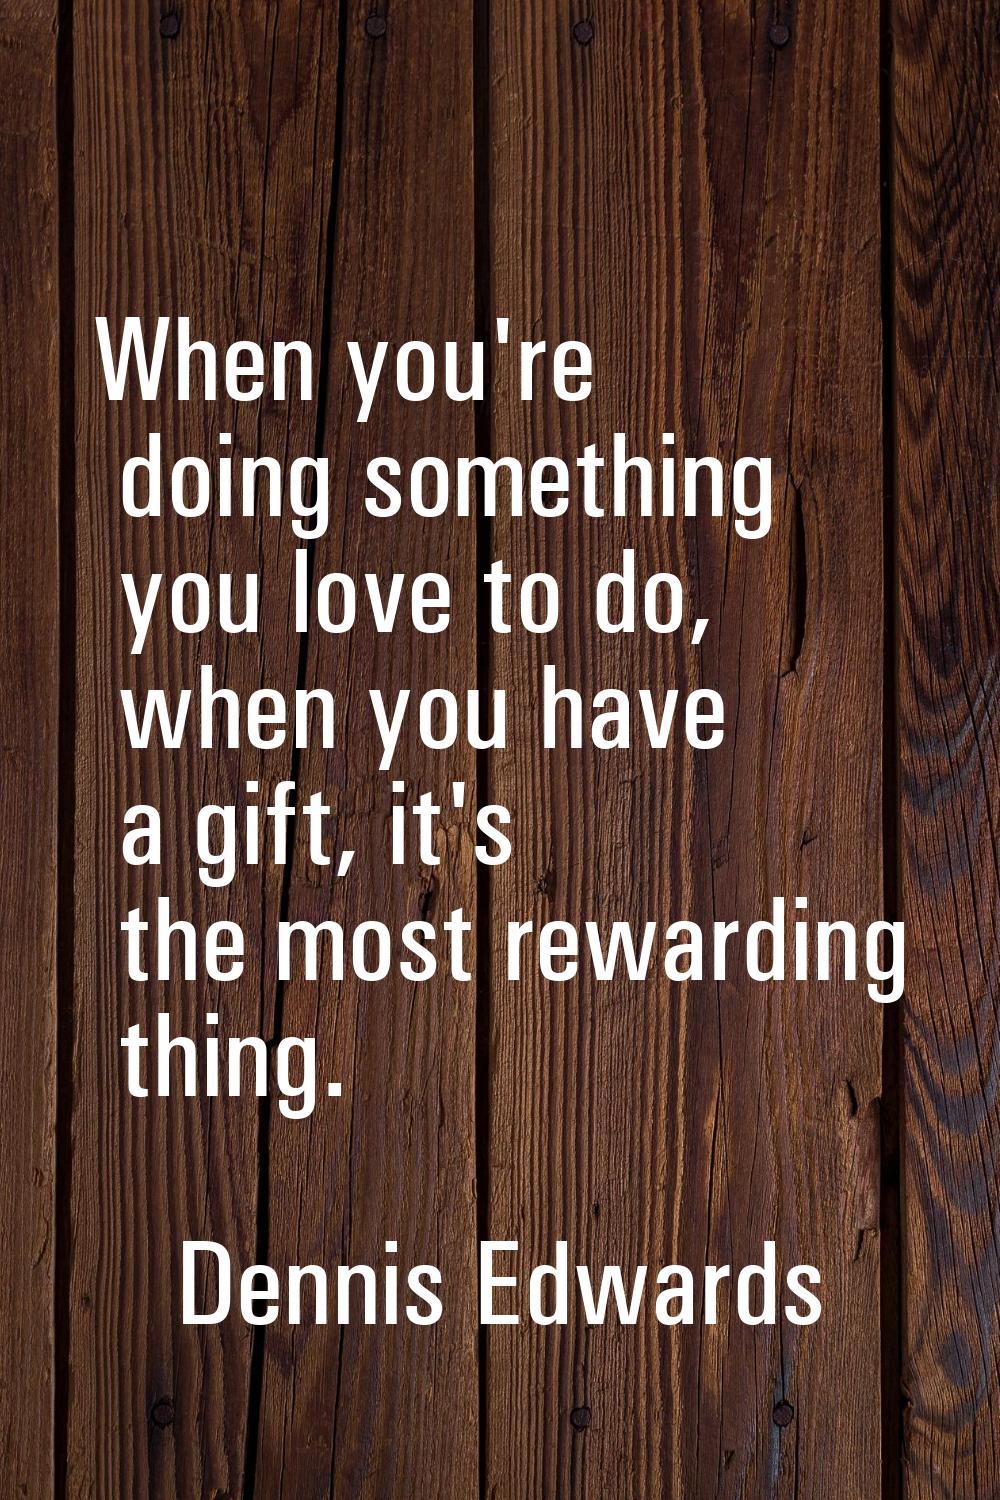 When you're doing something you love to do, when you have a gift, it's the most rewarding thing.